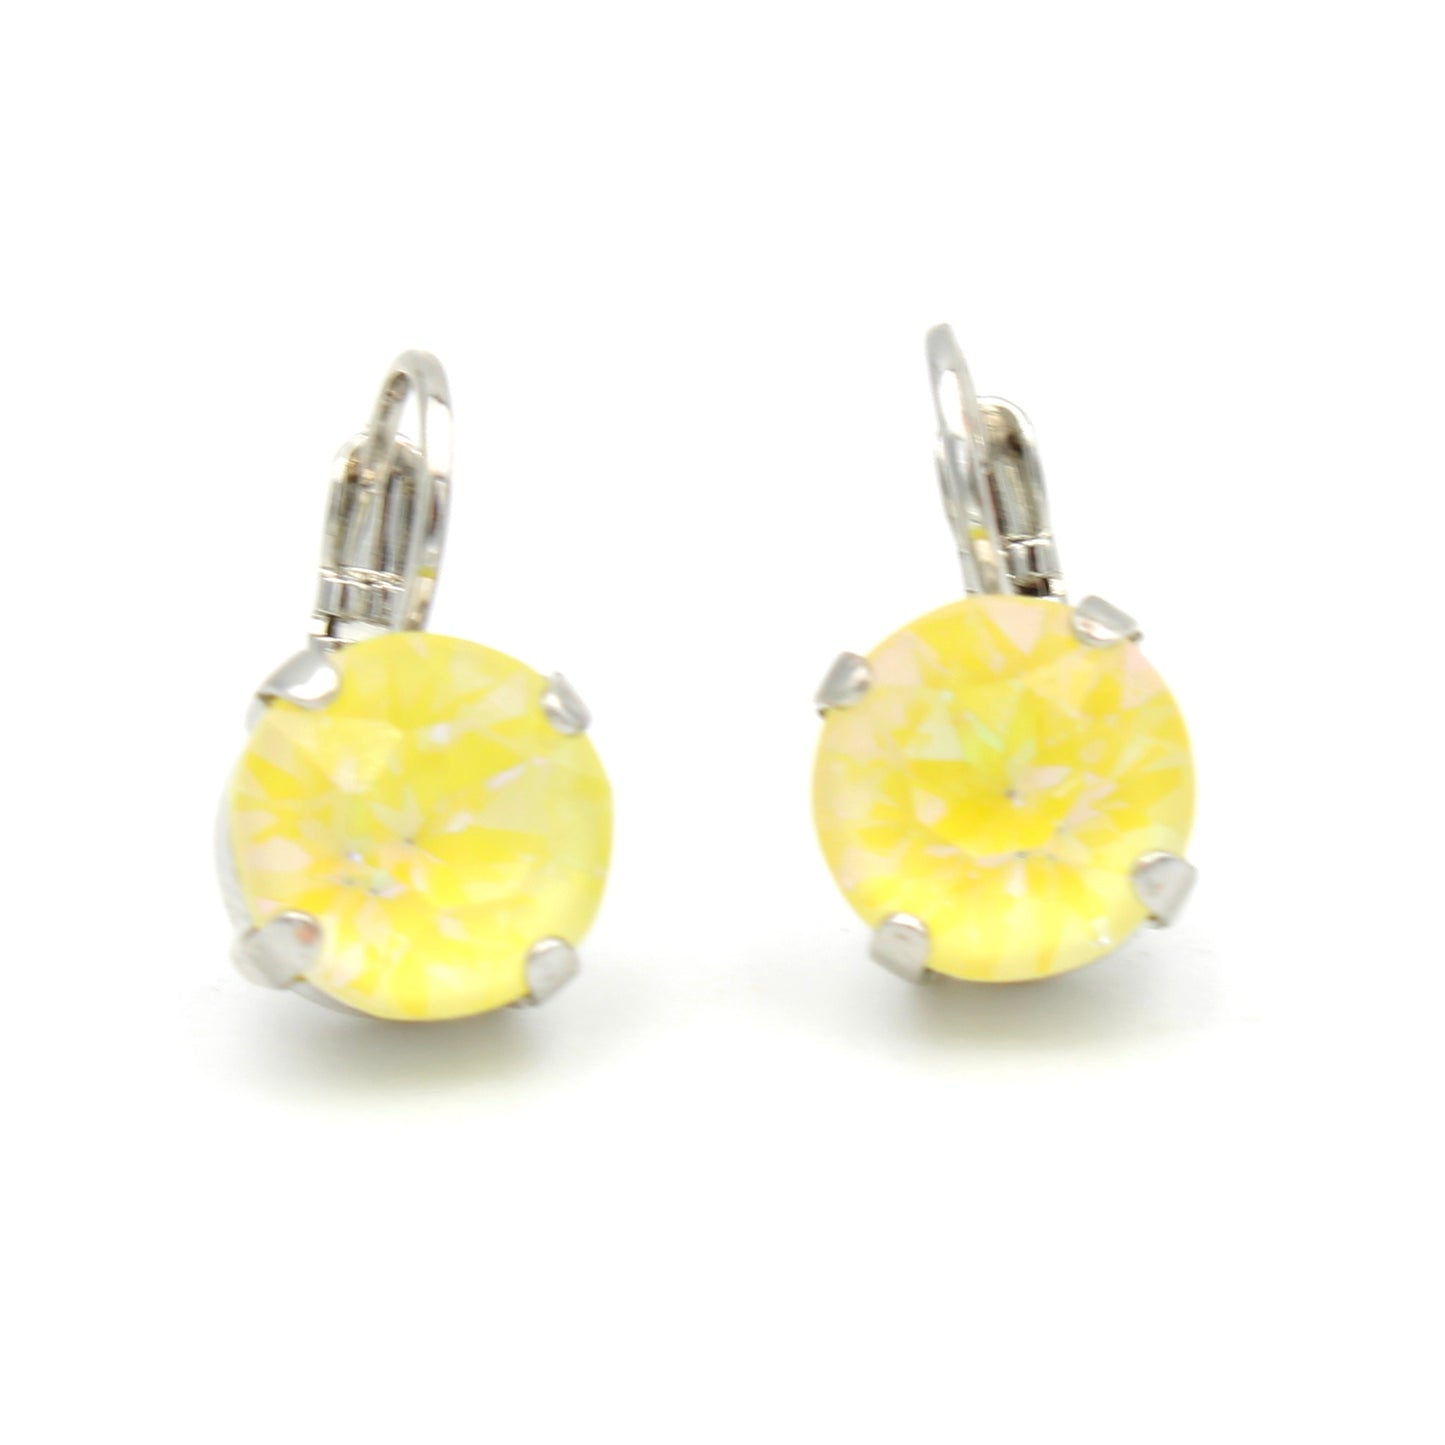 Sunshine Sunkissed 10MM Round Crystal Earrings